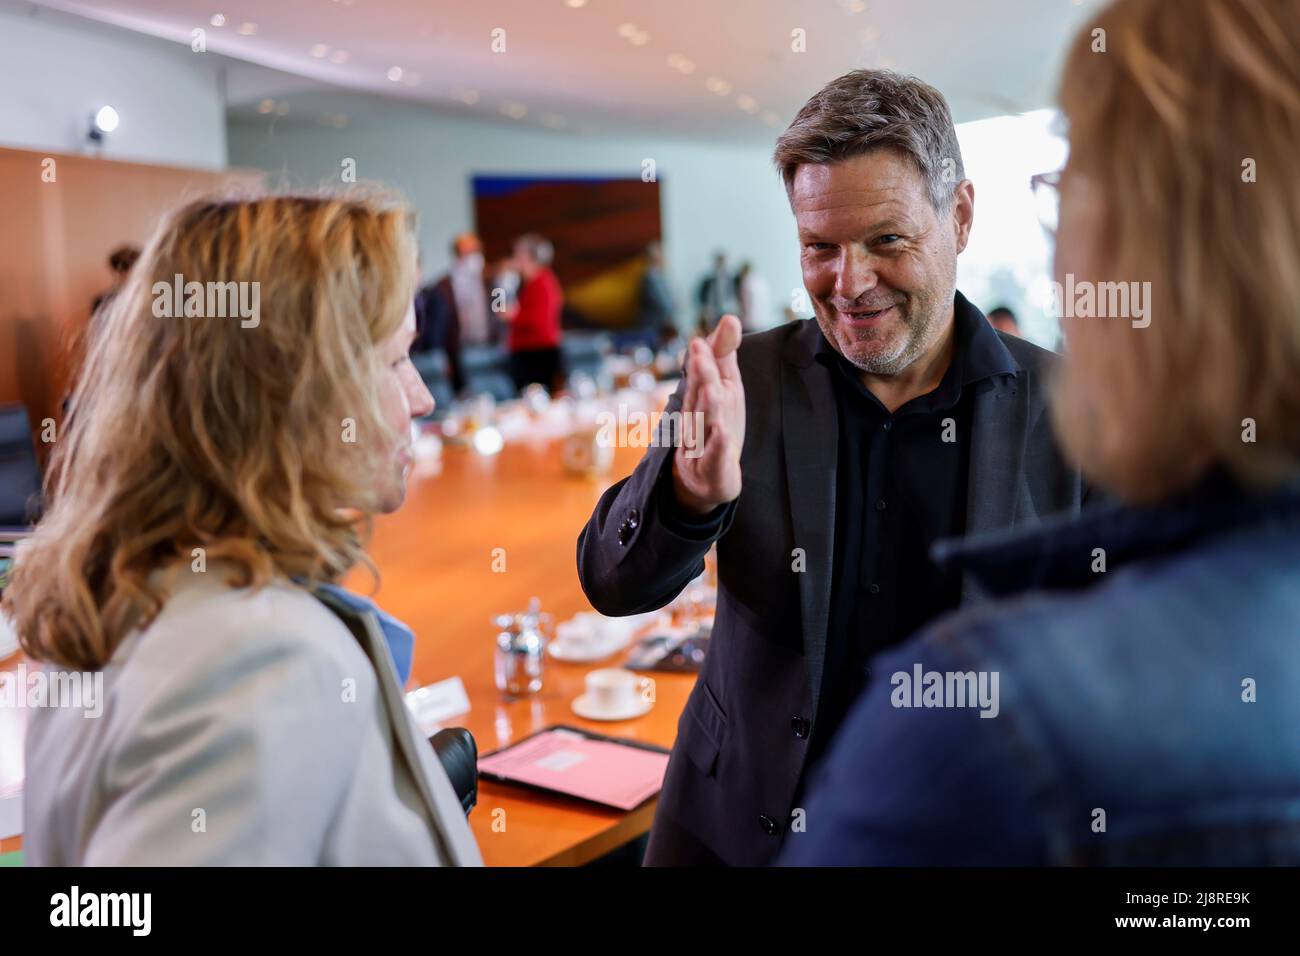 German Economy and Climate Minister Robert Habeck attends the weekly cabinet meeting session in the German Federal Chancellery in Berlin, Germany May 18, 2022. REUTERS/Hannibal Hanschke Stock Photo